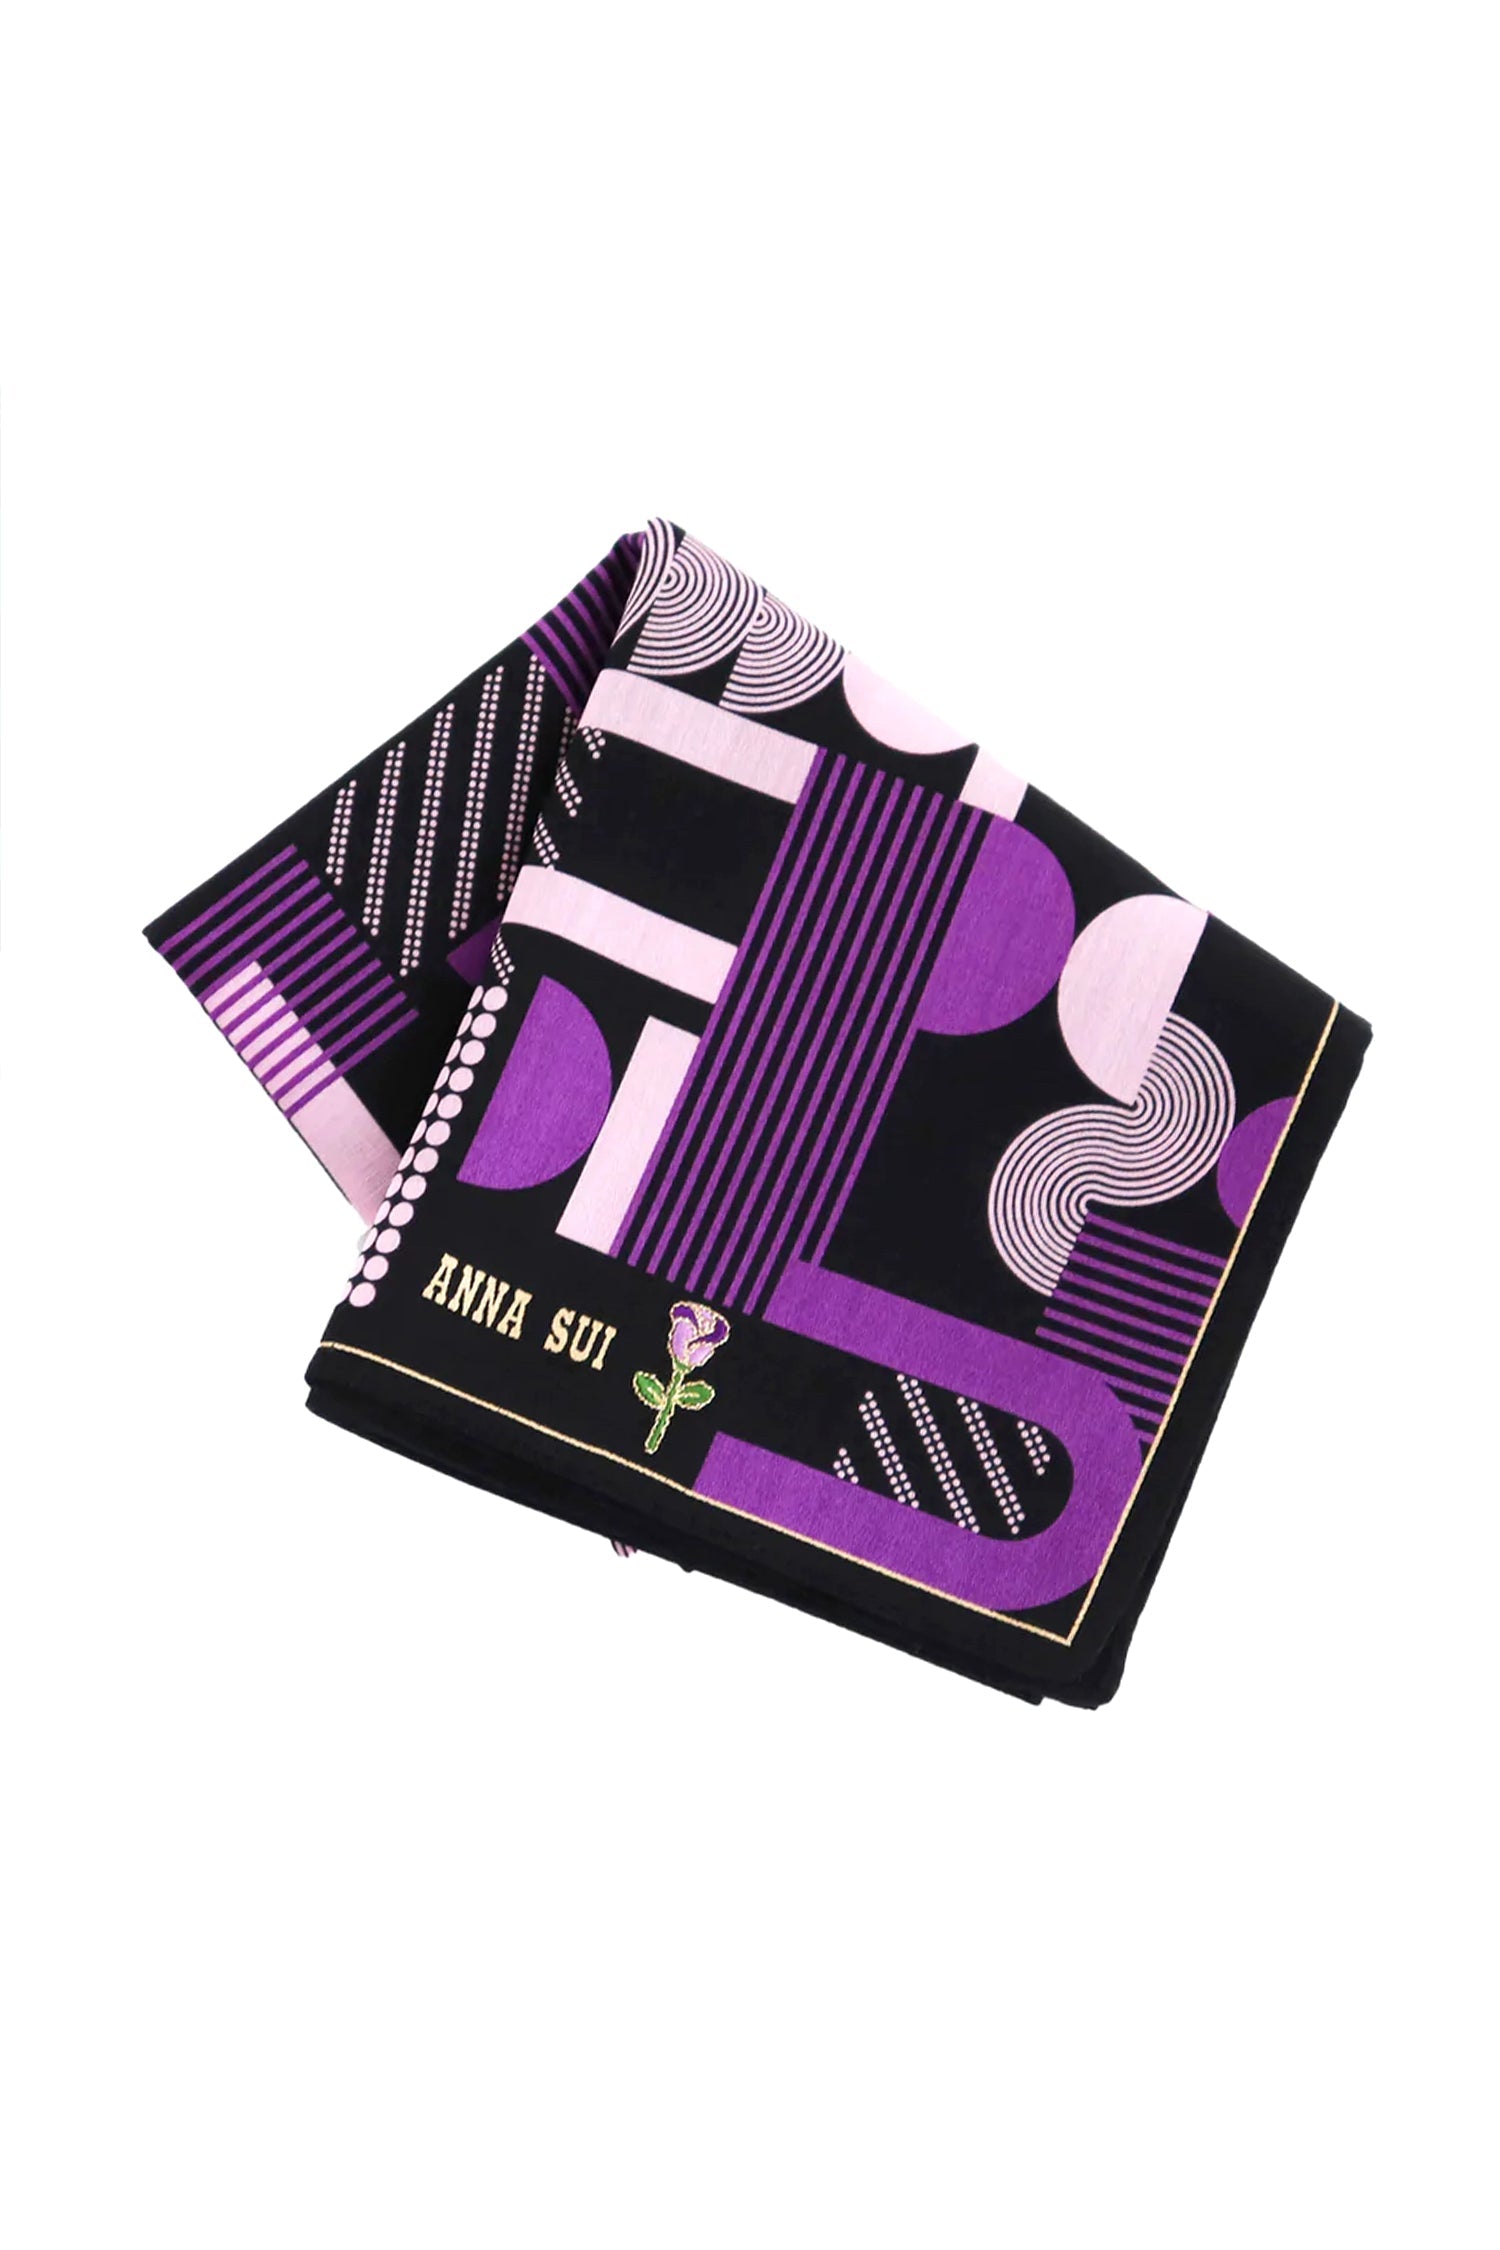 Dancing Deco Handkerchief, black with purple/white lines disco design, Anna’s label with a red rose